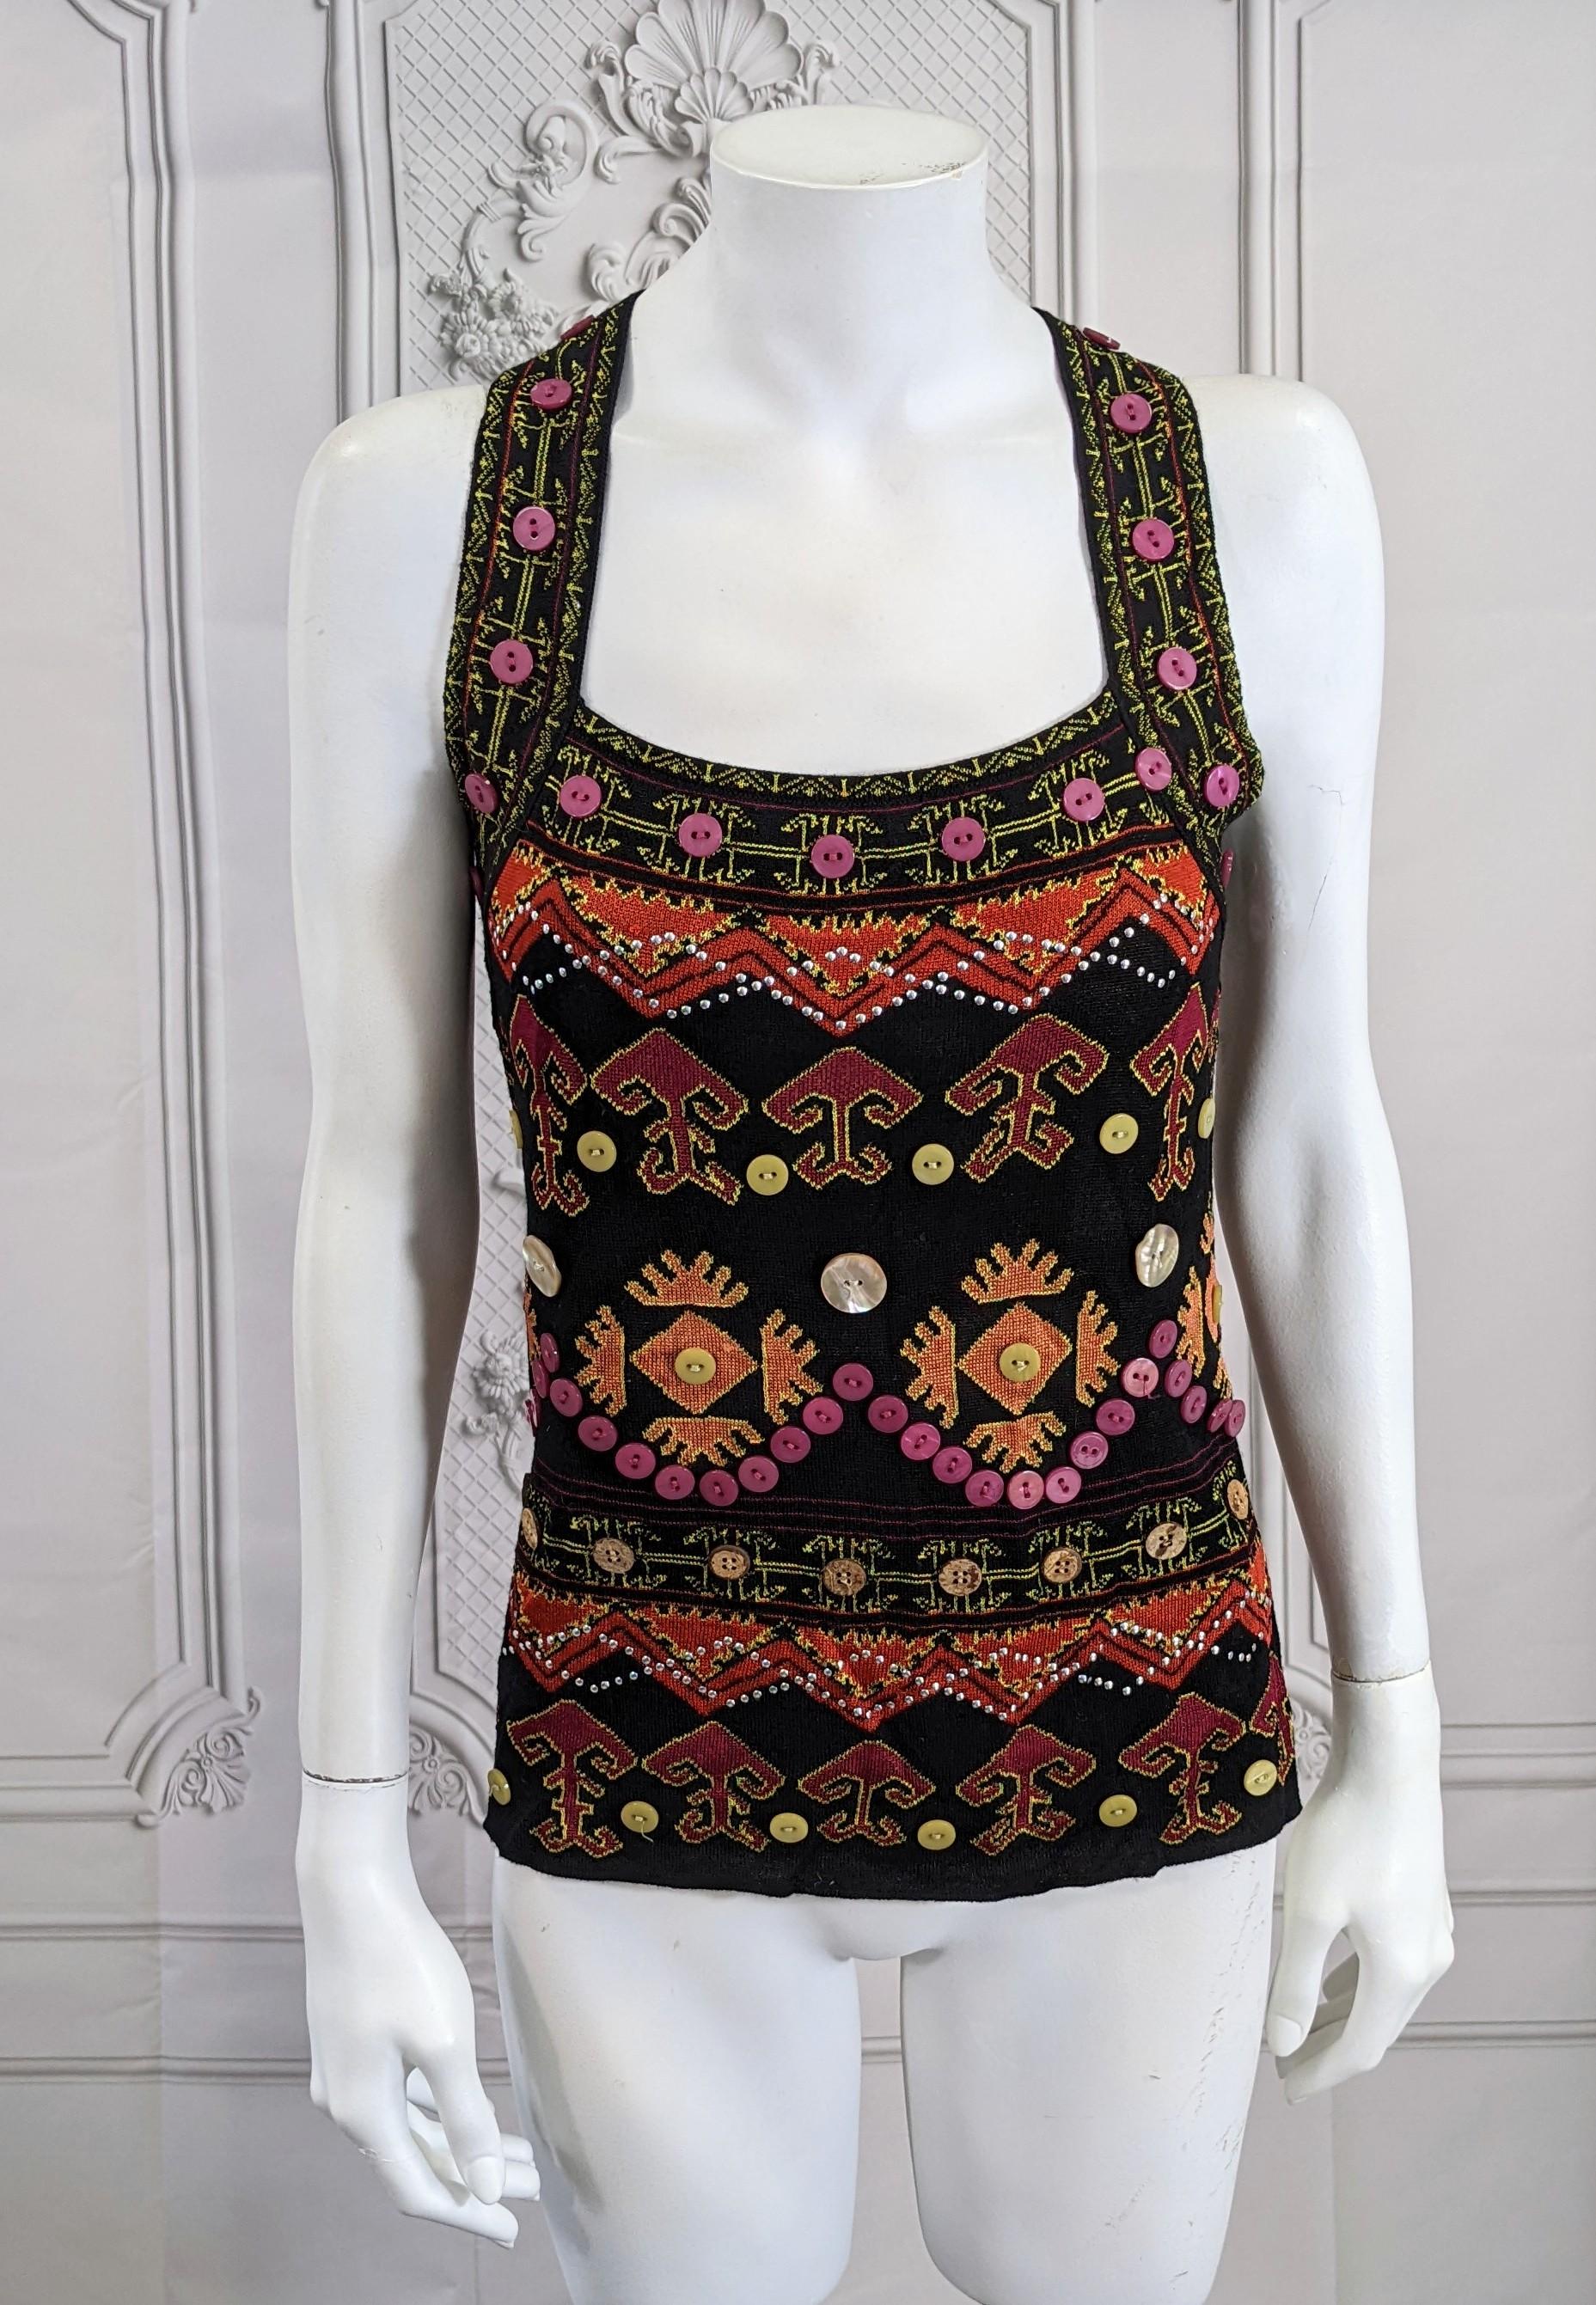 Charming John Galliano for Christian Dior  Fall/Winter 2002  knitted tank top.  A charming example of Galliano's continent-hopping multi ethnic inspiration including Eskimo, Mongolian and Middle Eastern embroideries, silver nail heads, and multi